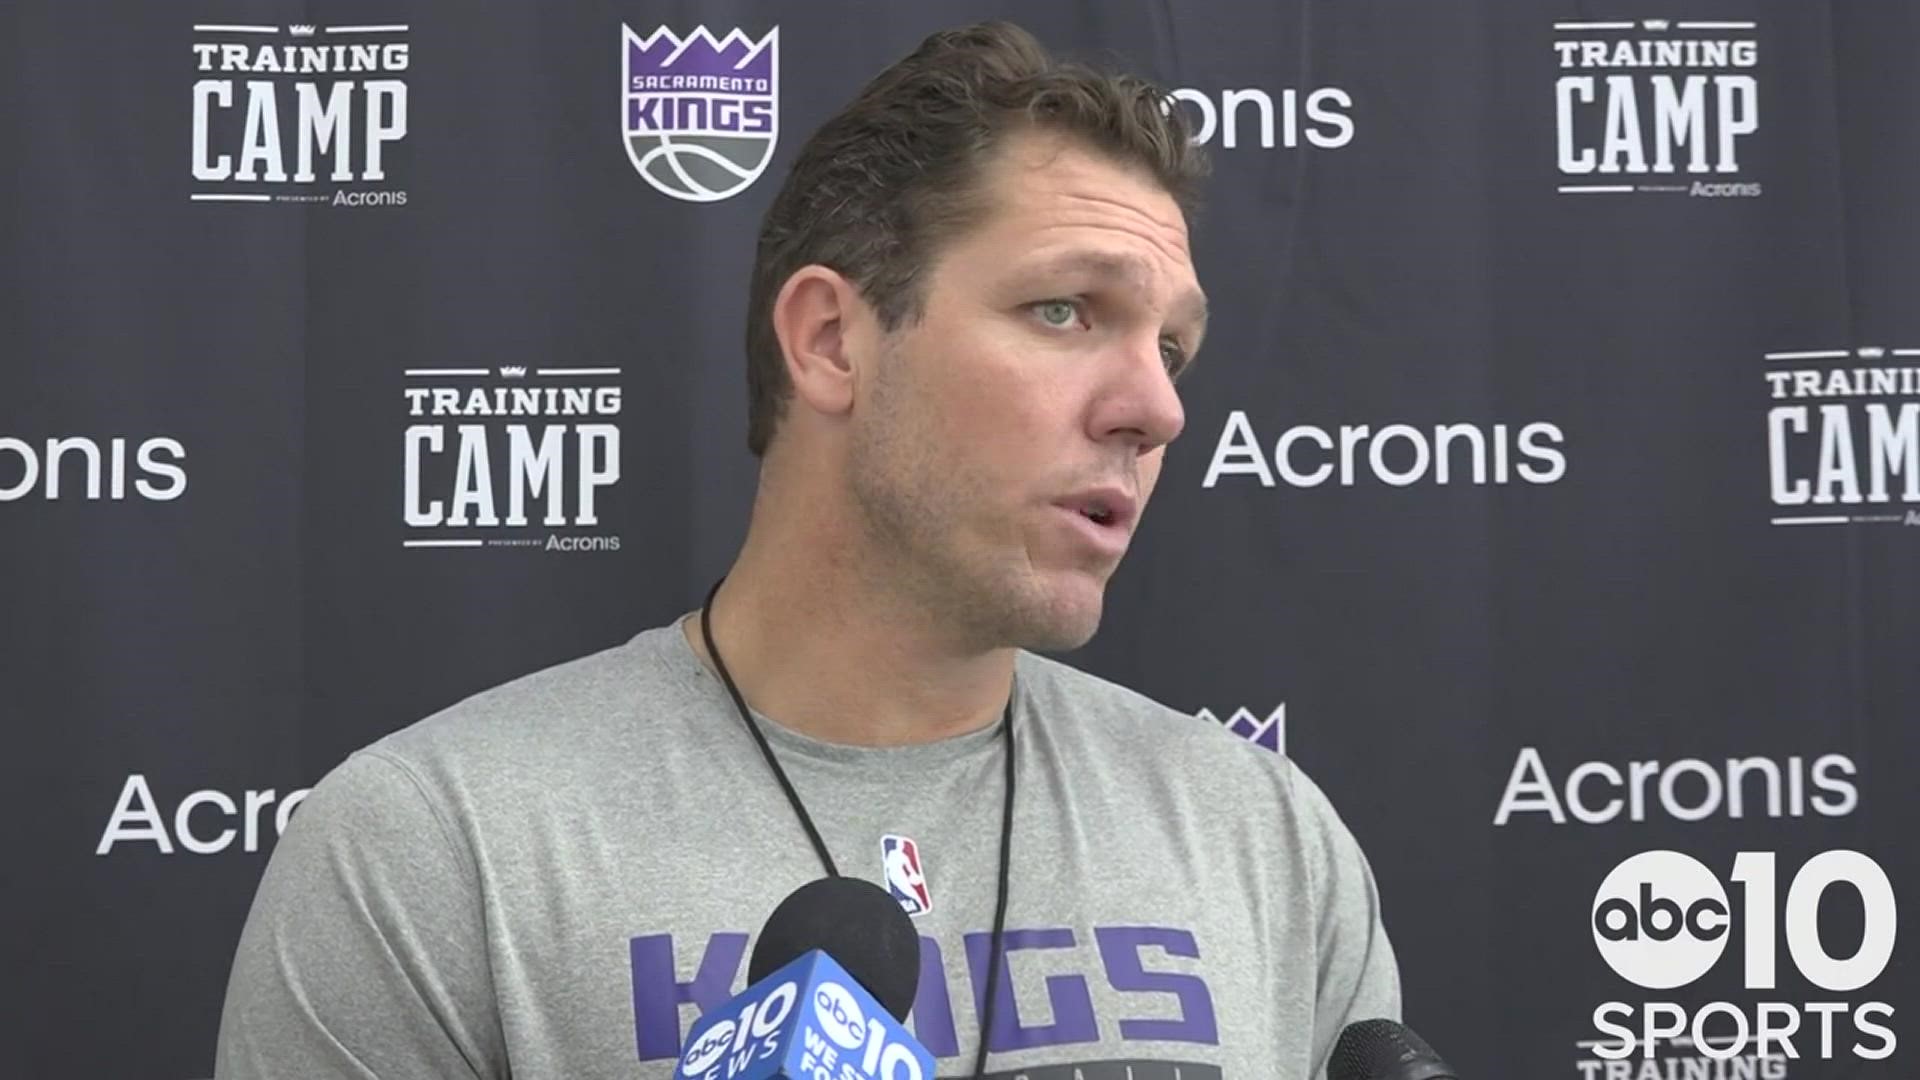 Sacramento Kings head coach Luke Walton on moving on from training camp, a 4-0 preseason schedule and turning the attention to Wednesday's season opener in Portland.